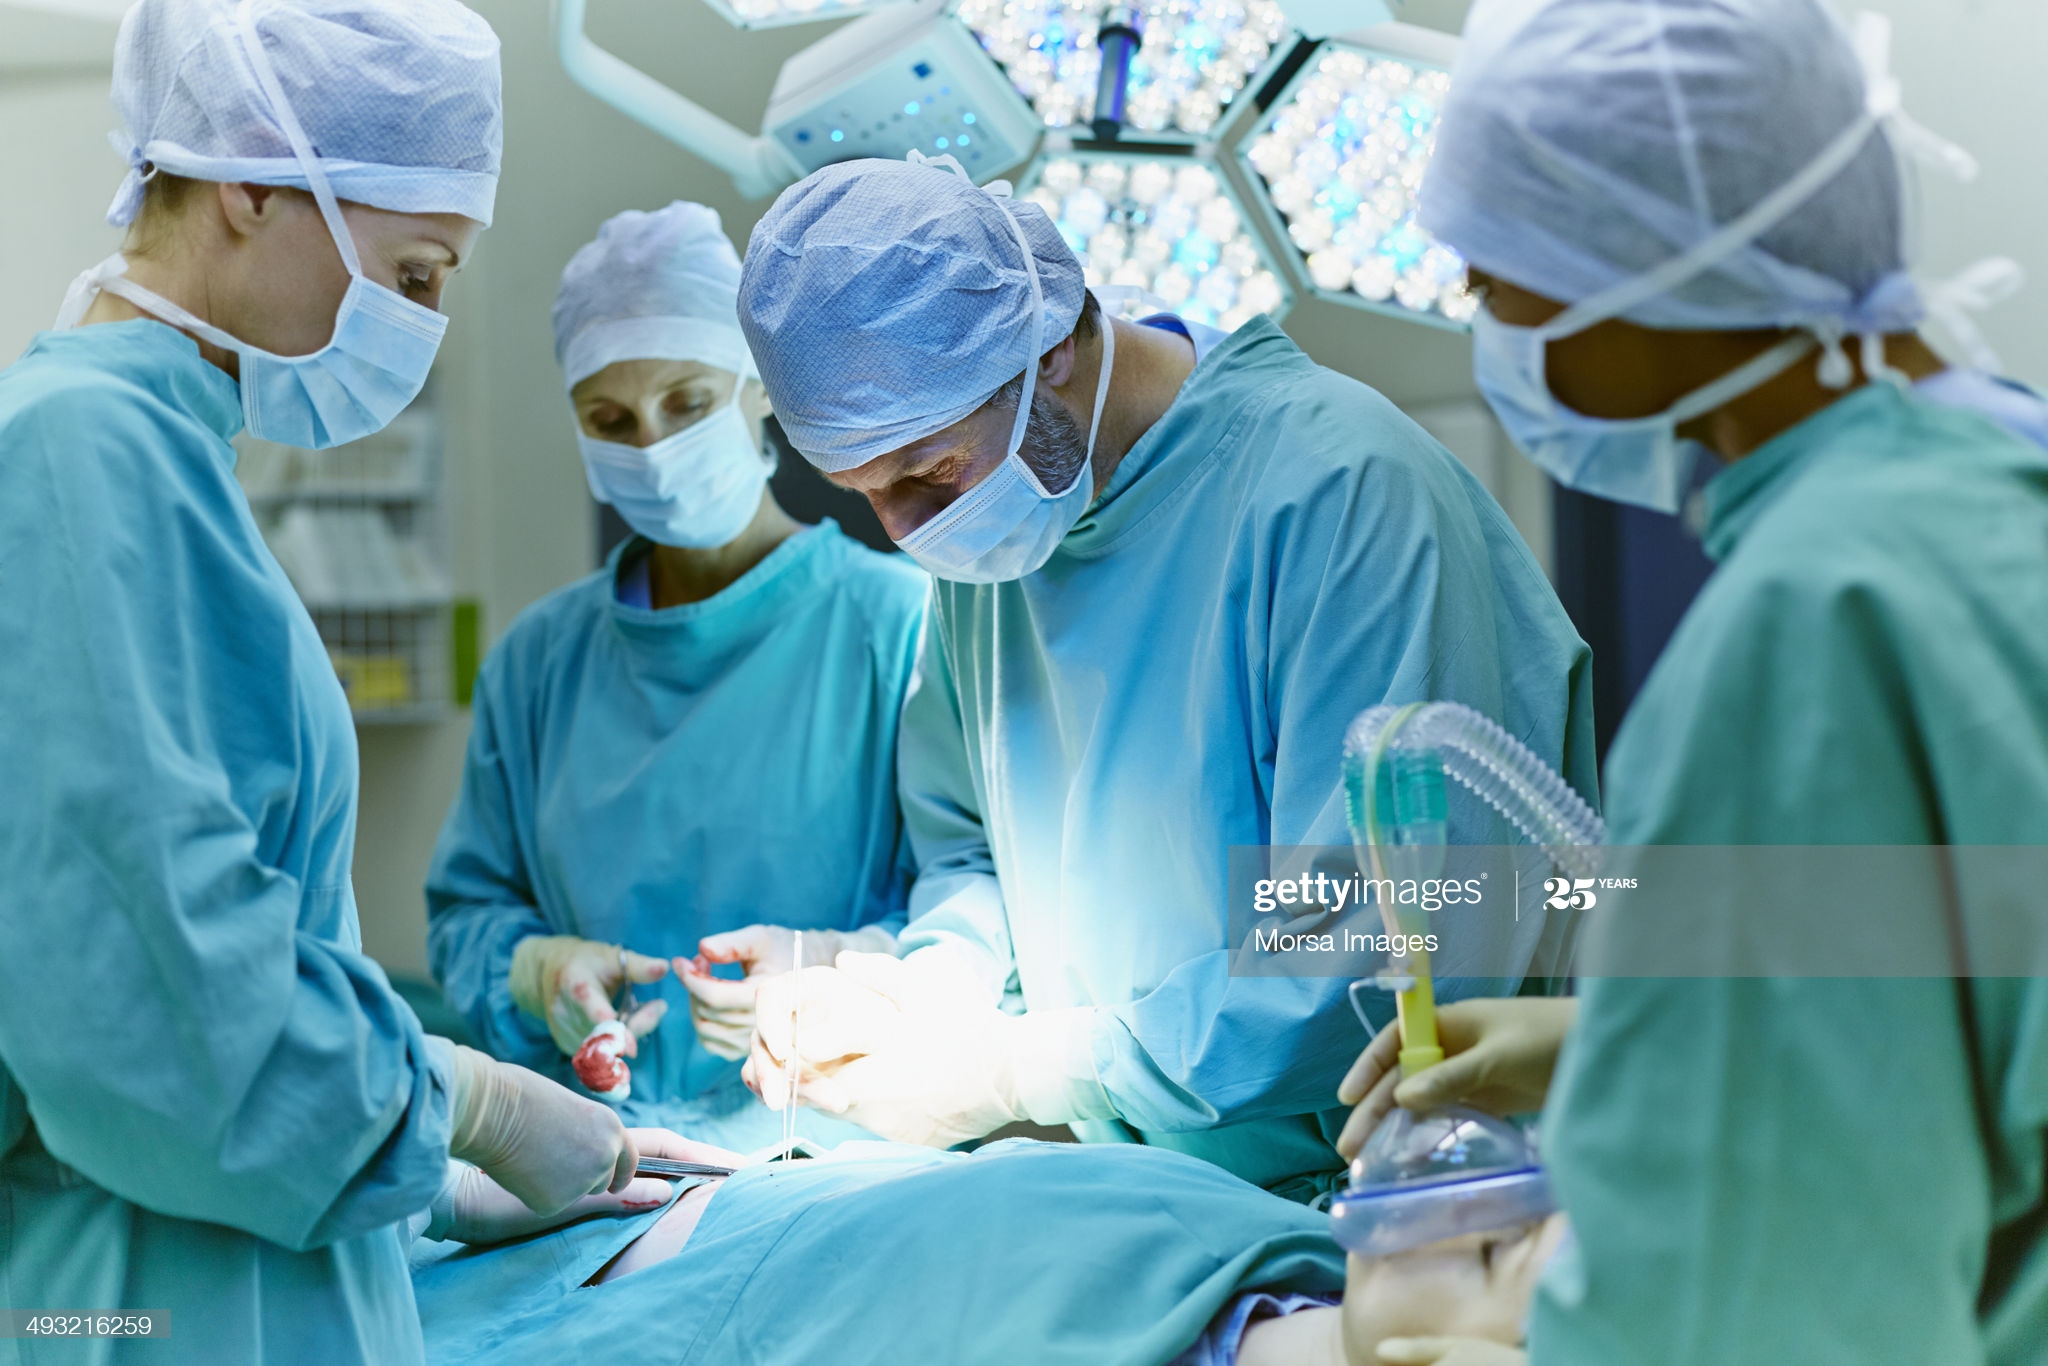 Group of surgeons performing surgery on patient in operating room